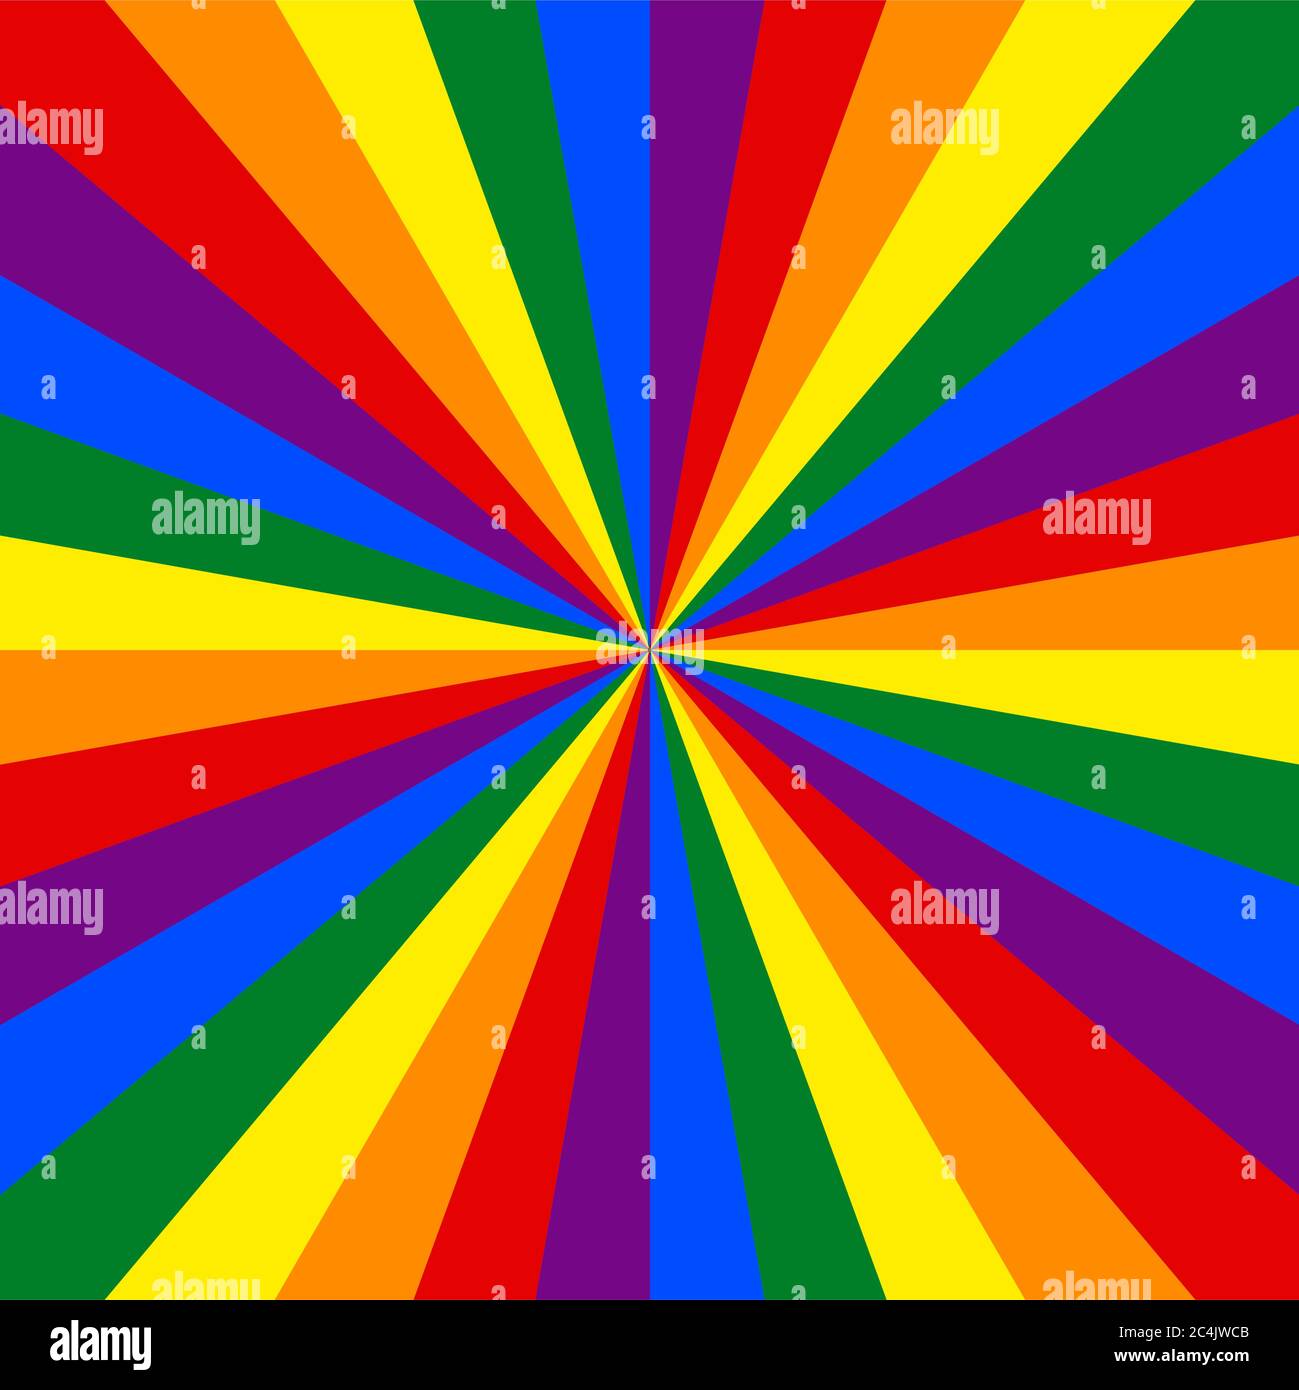 Lgbt Flag Rainbow Background Abstract Sunburst Or Sunbeams Pattern For Use In Lgbtqi Pride